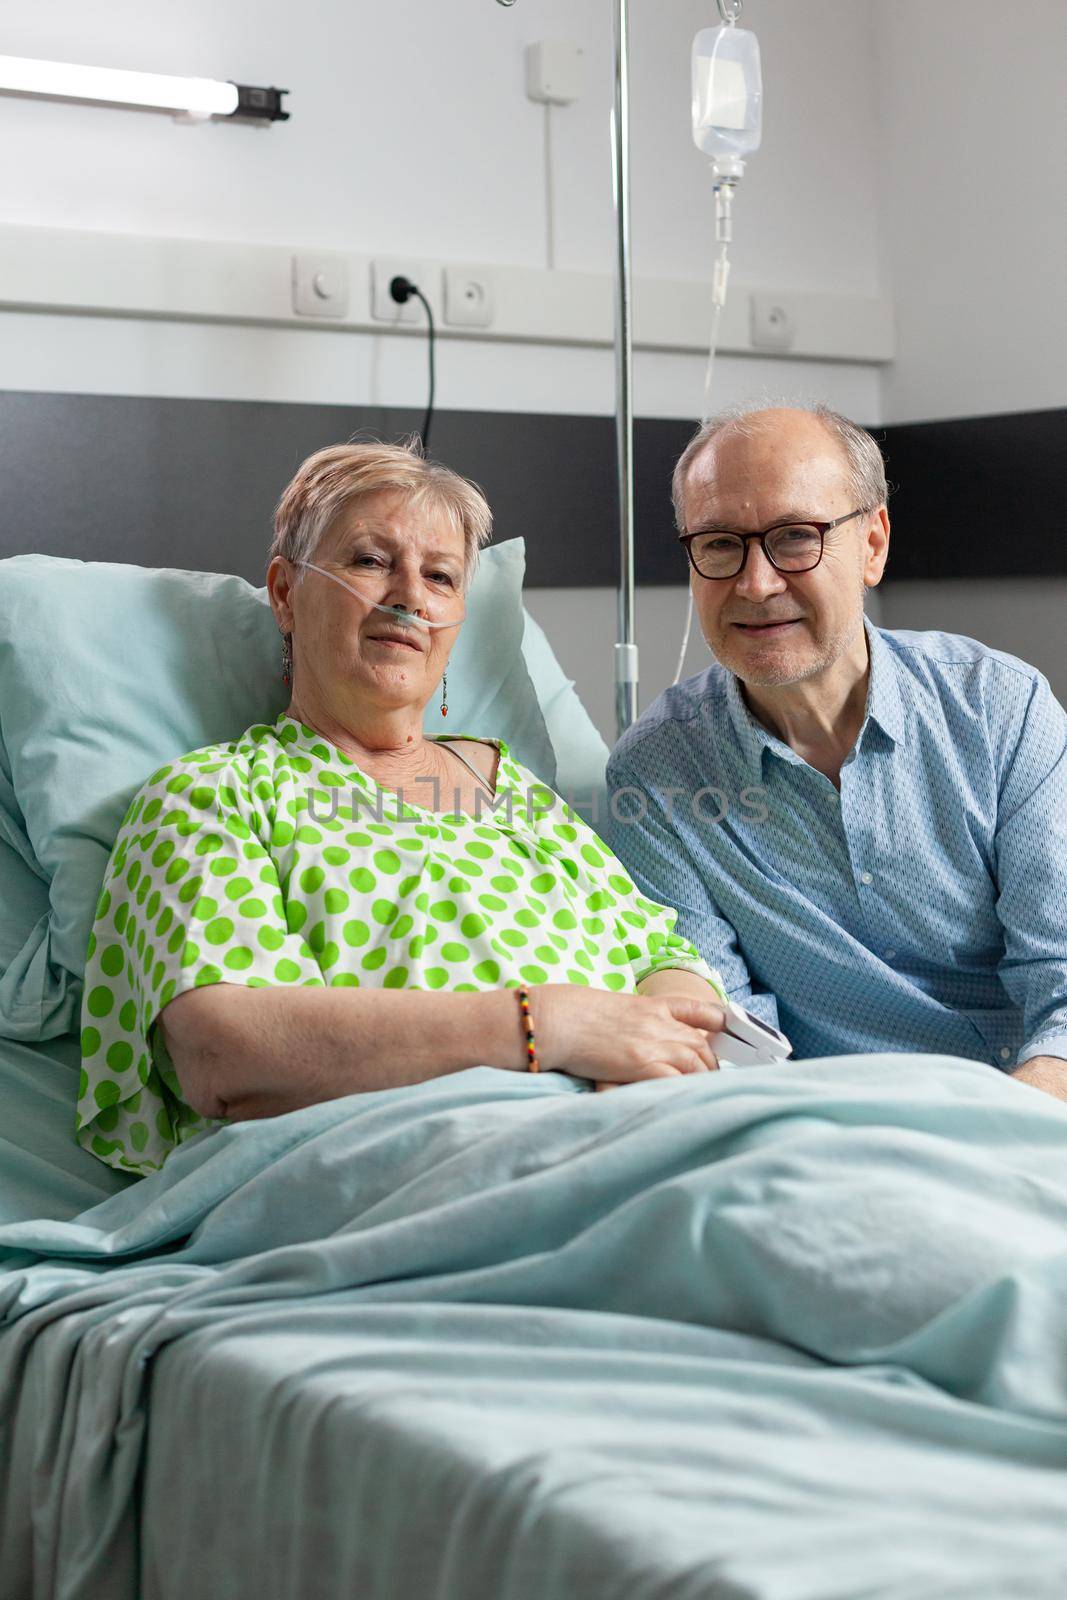 Retired hospitalized sick woman lying in bed with husband visitor sitting beside her waiting together for medical treatment. Senior man visiting patient during medicine examination in hospital ward